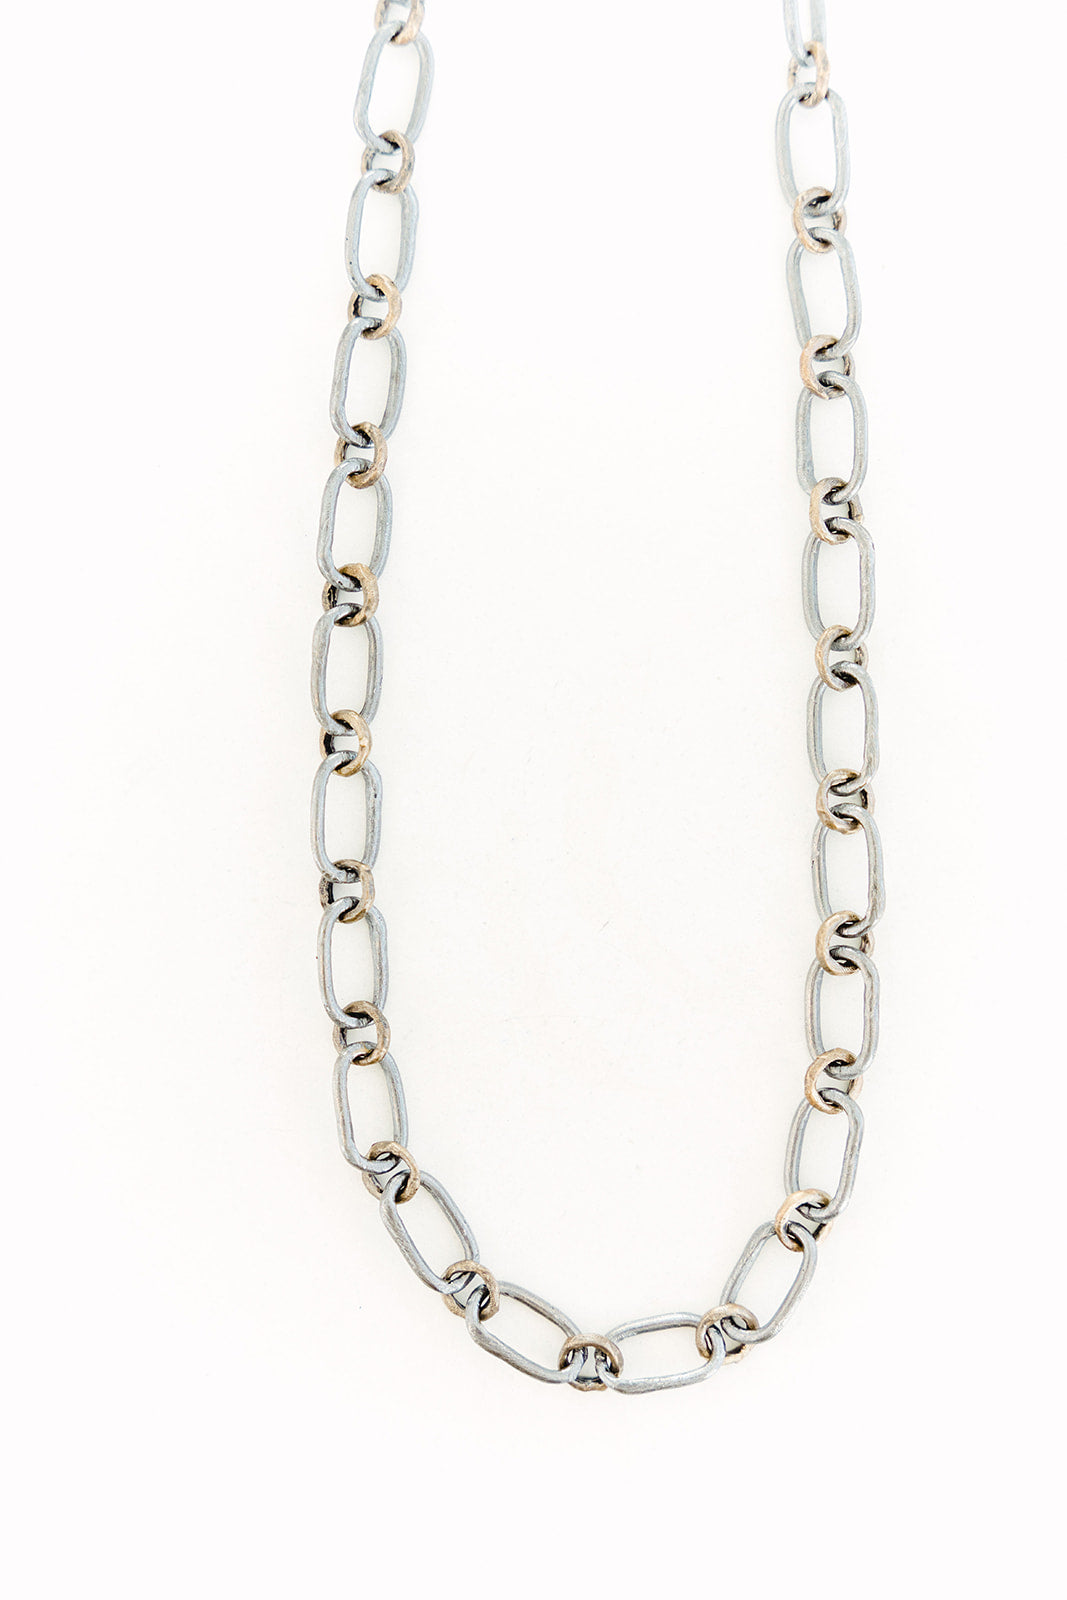 34" Sterling Silver and Bronze Bounty Chain